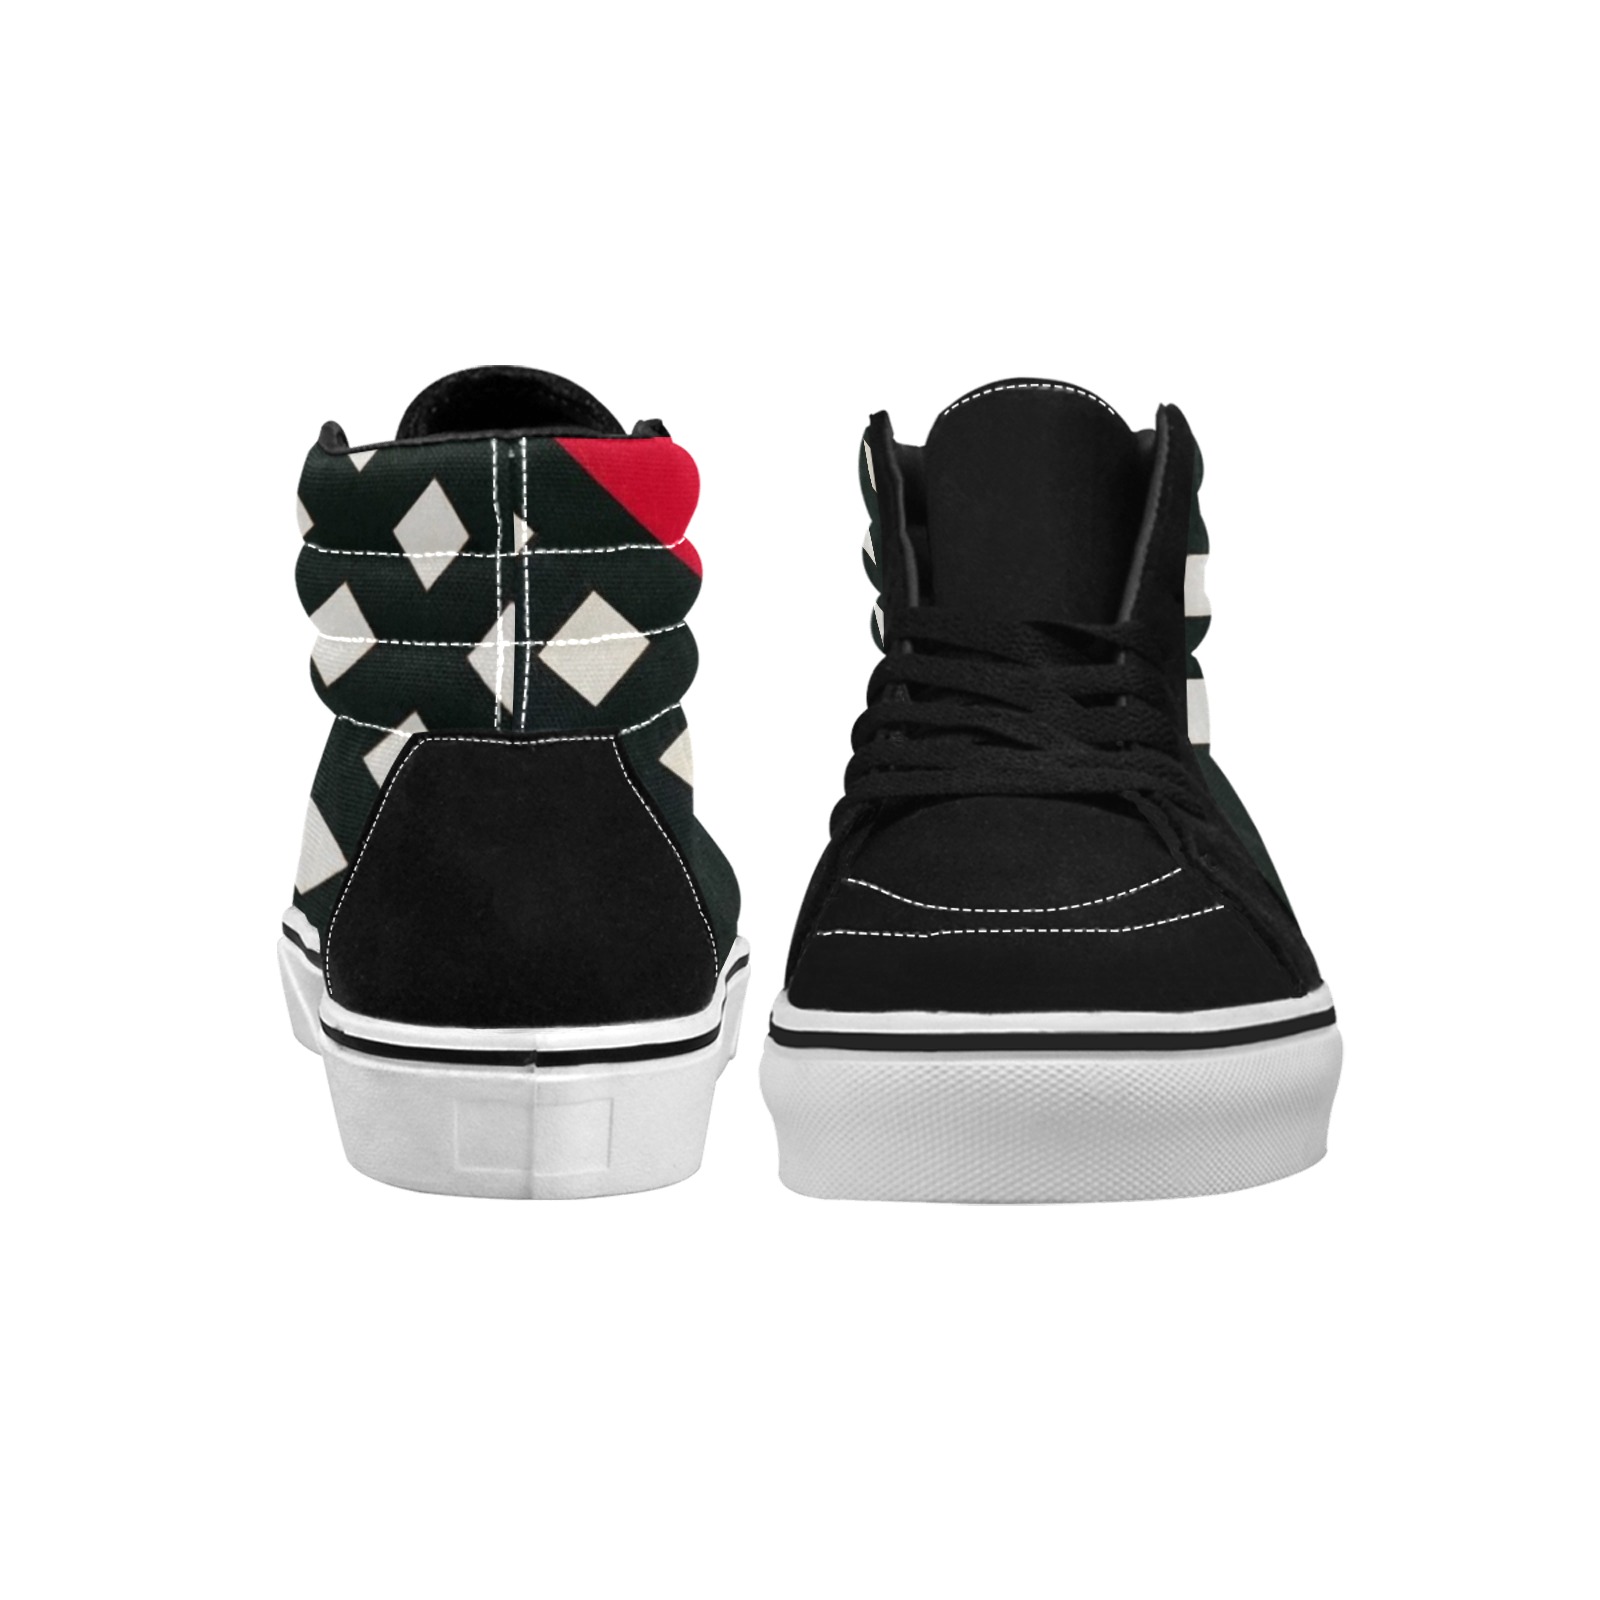 Counter-composition XV by Theo van Doesburg- Men's High Top Skateboarding Shoes (Model E001-1)